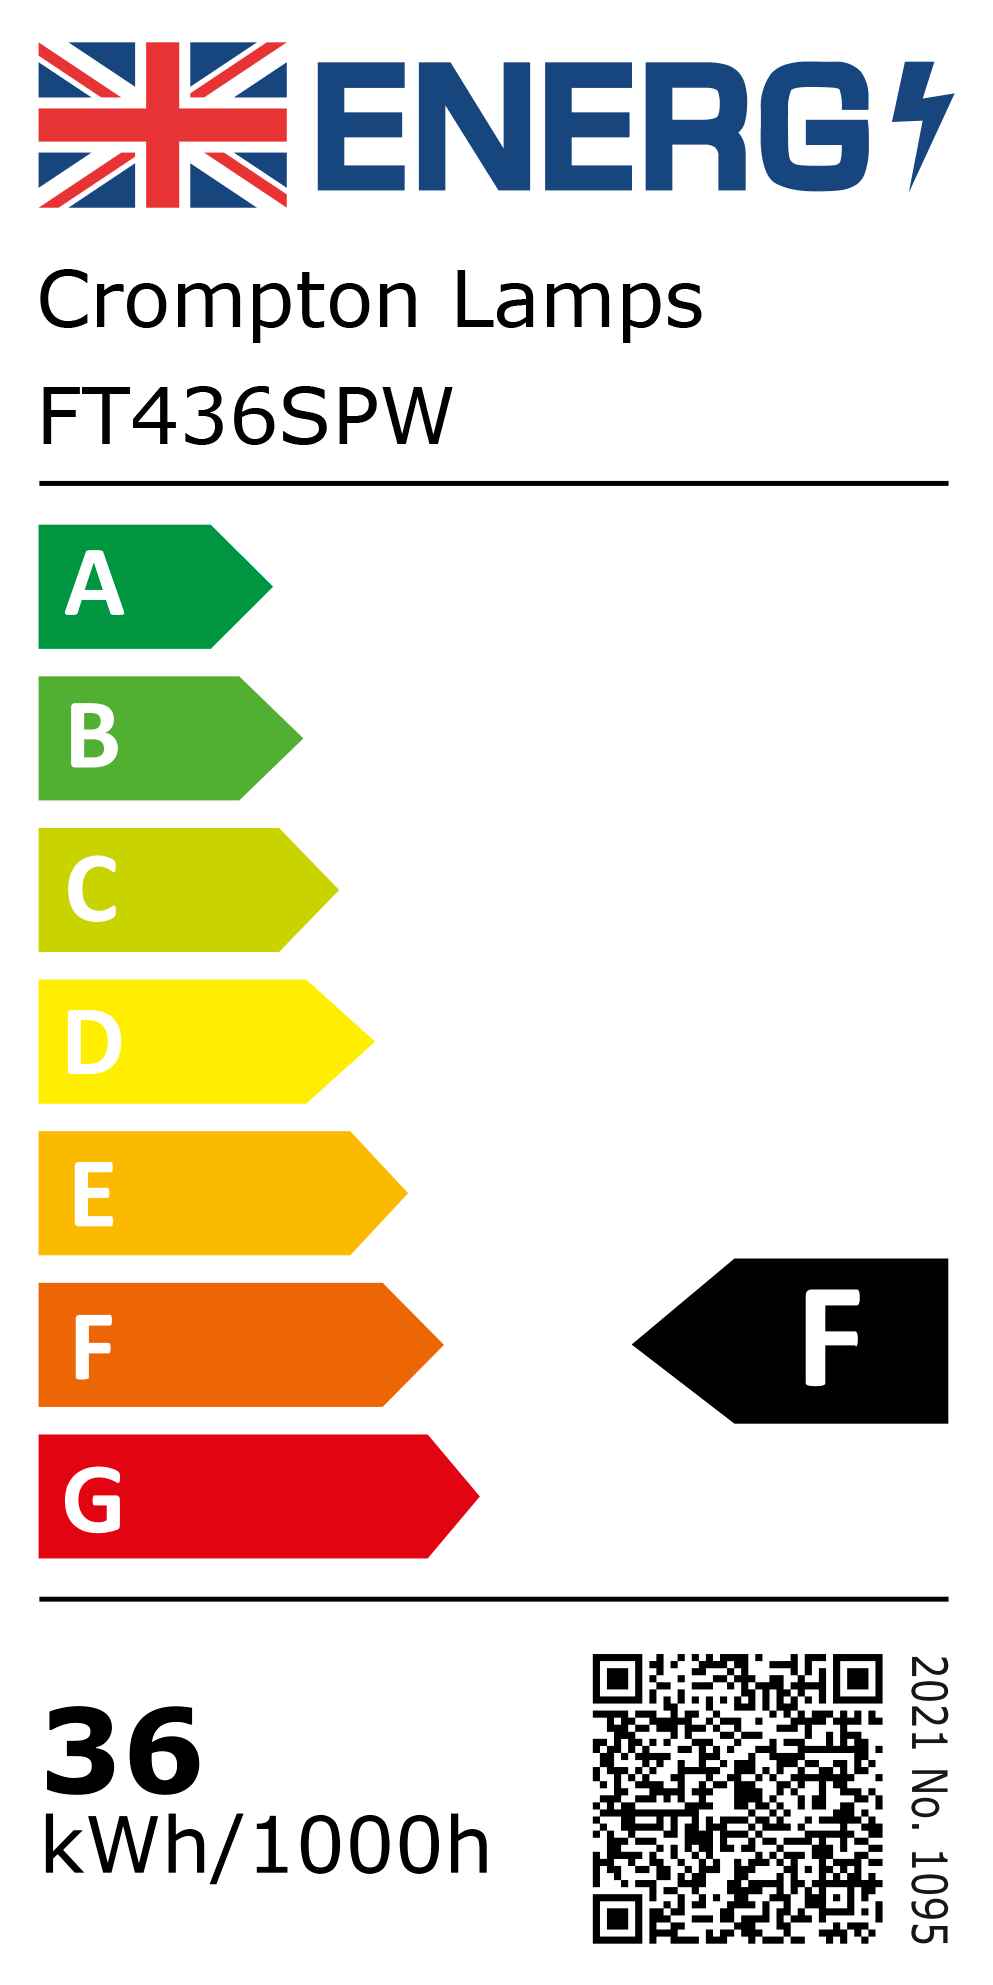 New 2021 Energy Rating Label: Stock Code FT436SPW